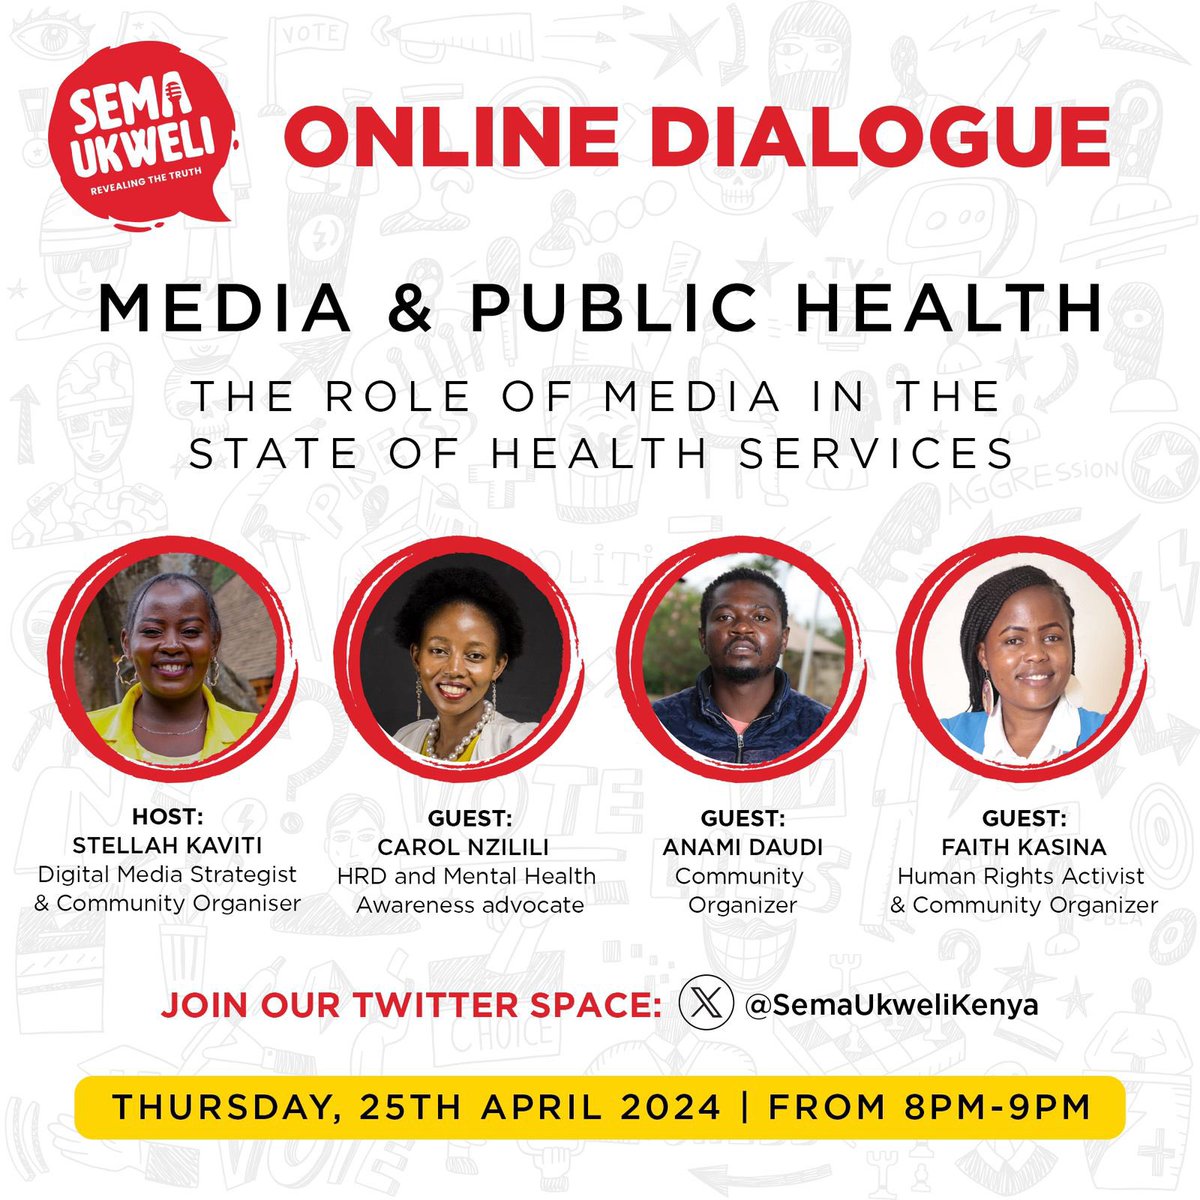 Public healthcare services have been severely curtailed due to the ongoing doctors' strike. What role does media play in the state of our health services? Join our panelists at 8pm this Thursday 25th April, as we explore this important topic. #CitizenJournalistSpaces #SemaUkweli